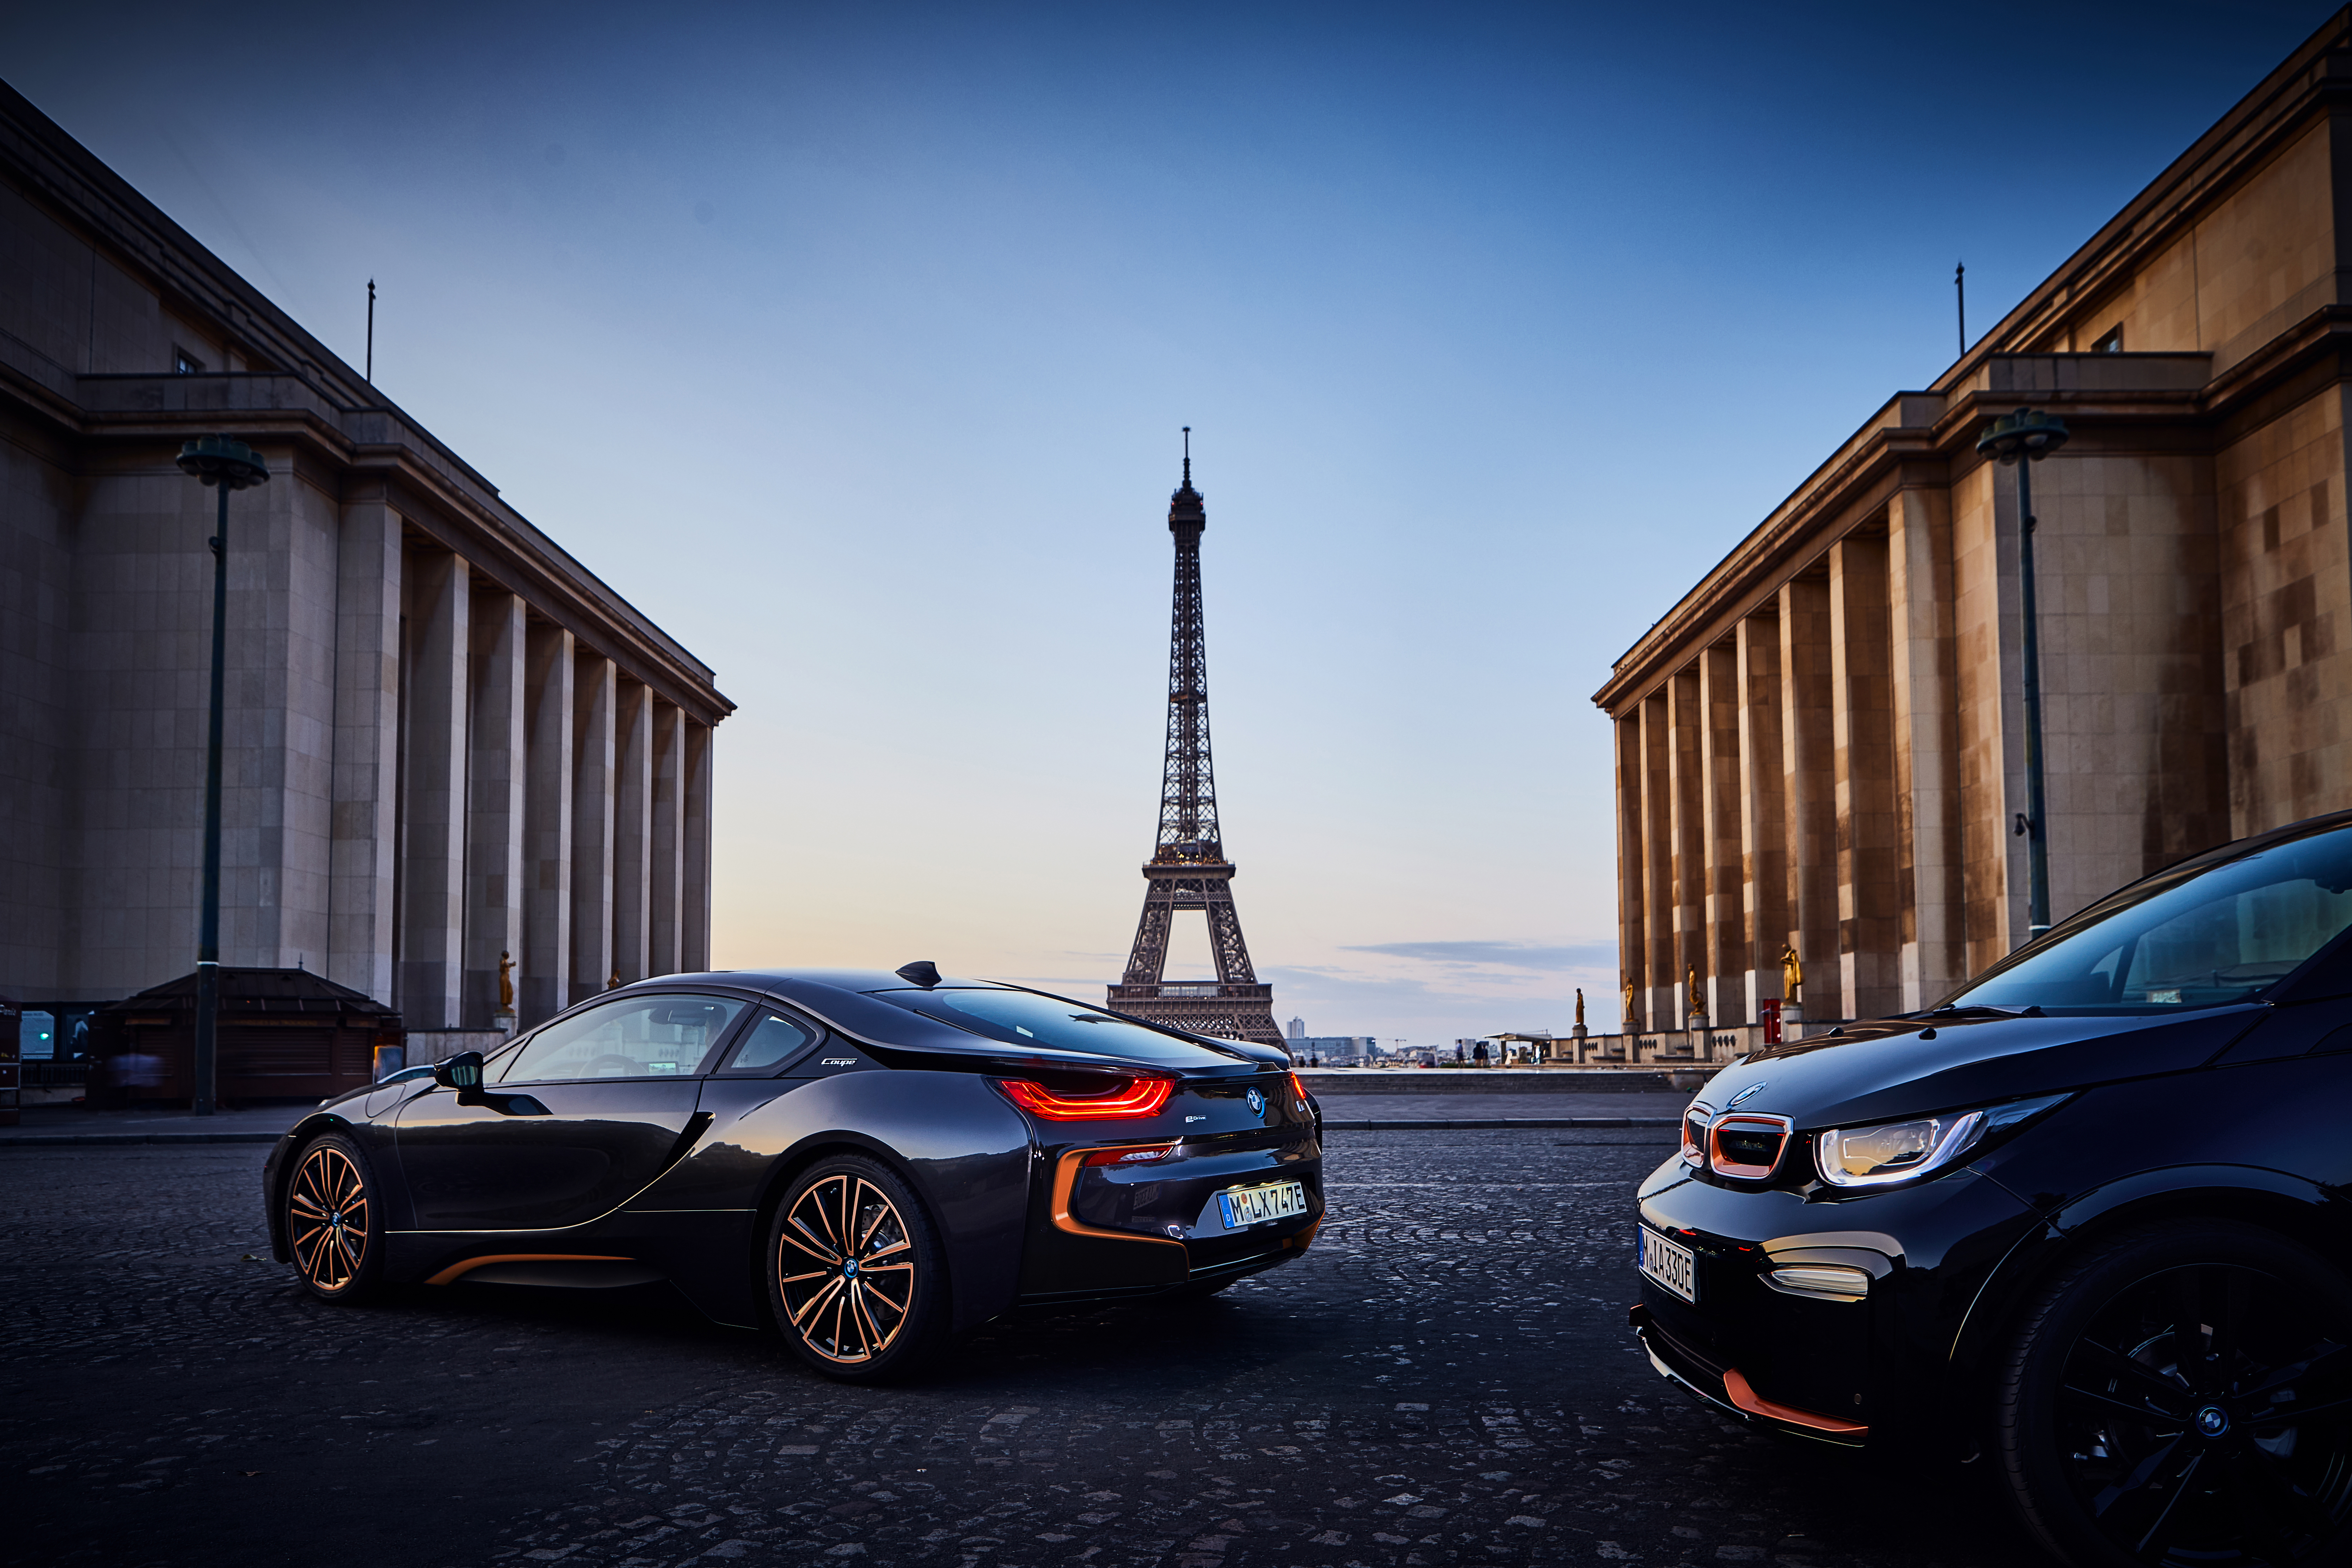 The BMW i3 Edition Roadstyle and i8 Ultimate Sophisto Edition